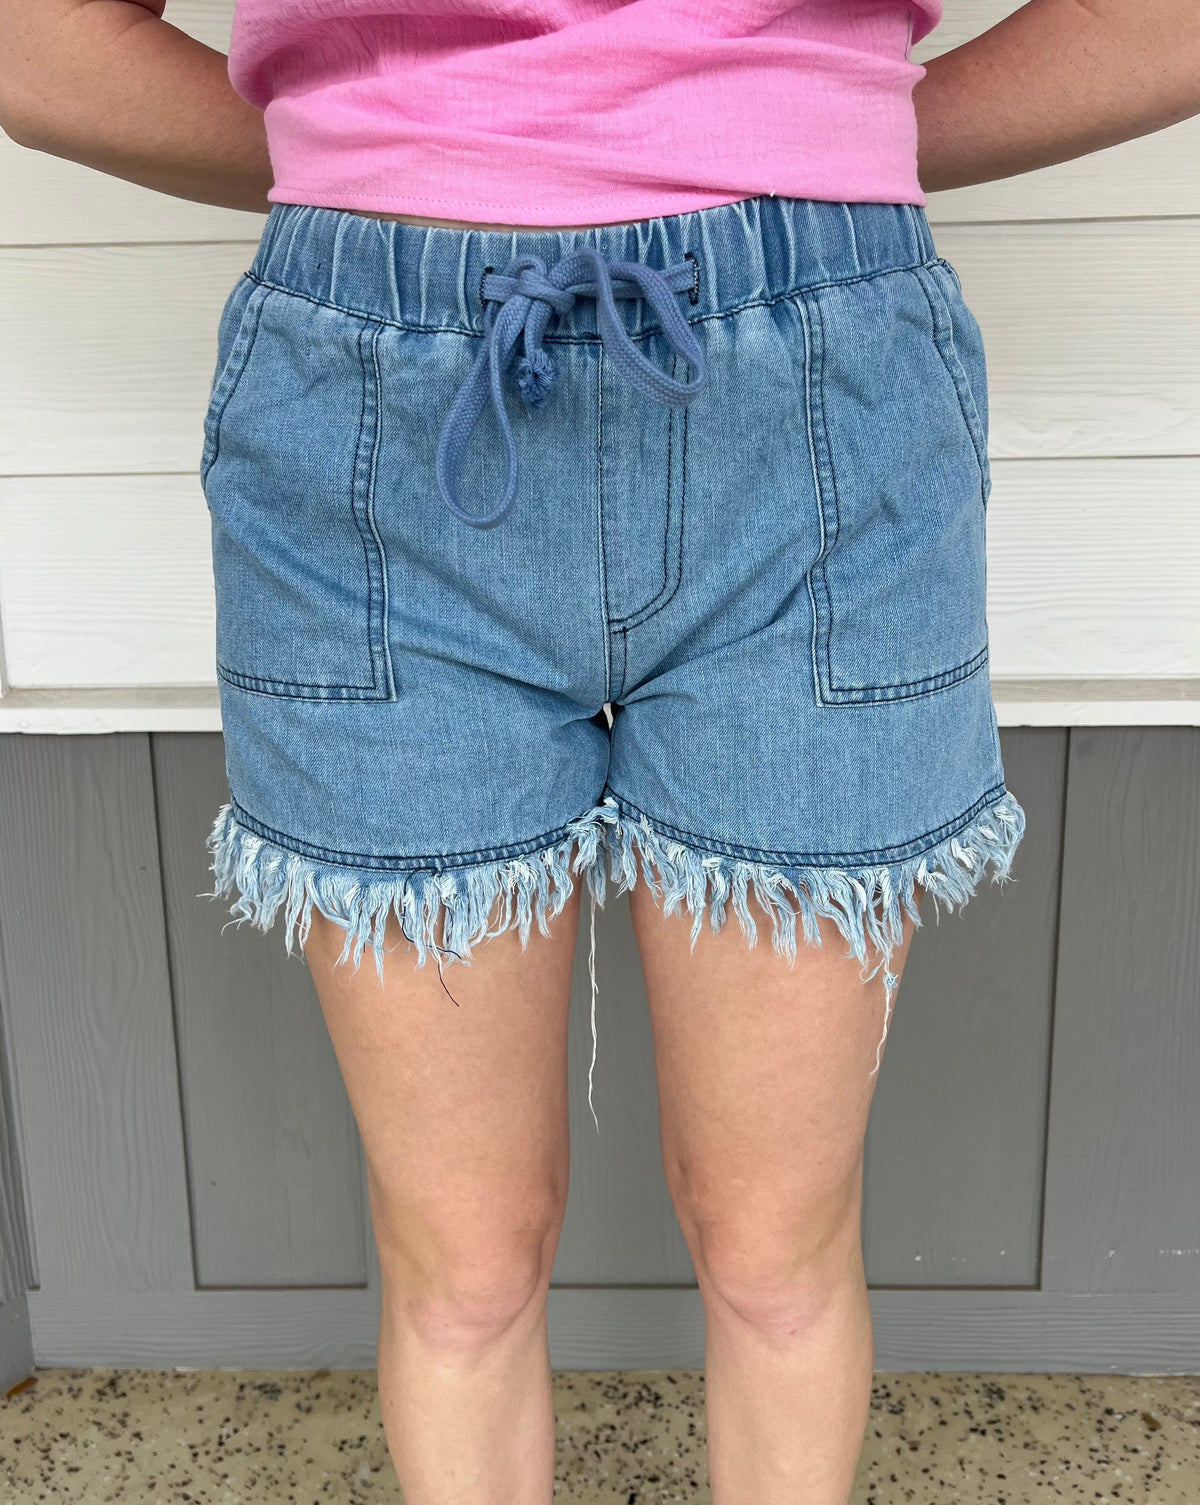 Don't Dull Your Sparkle Shorts